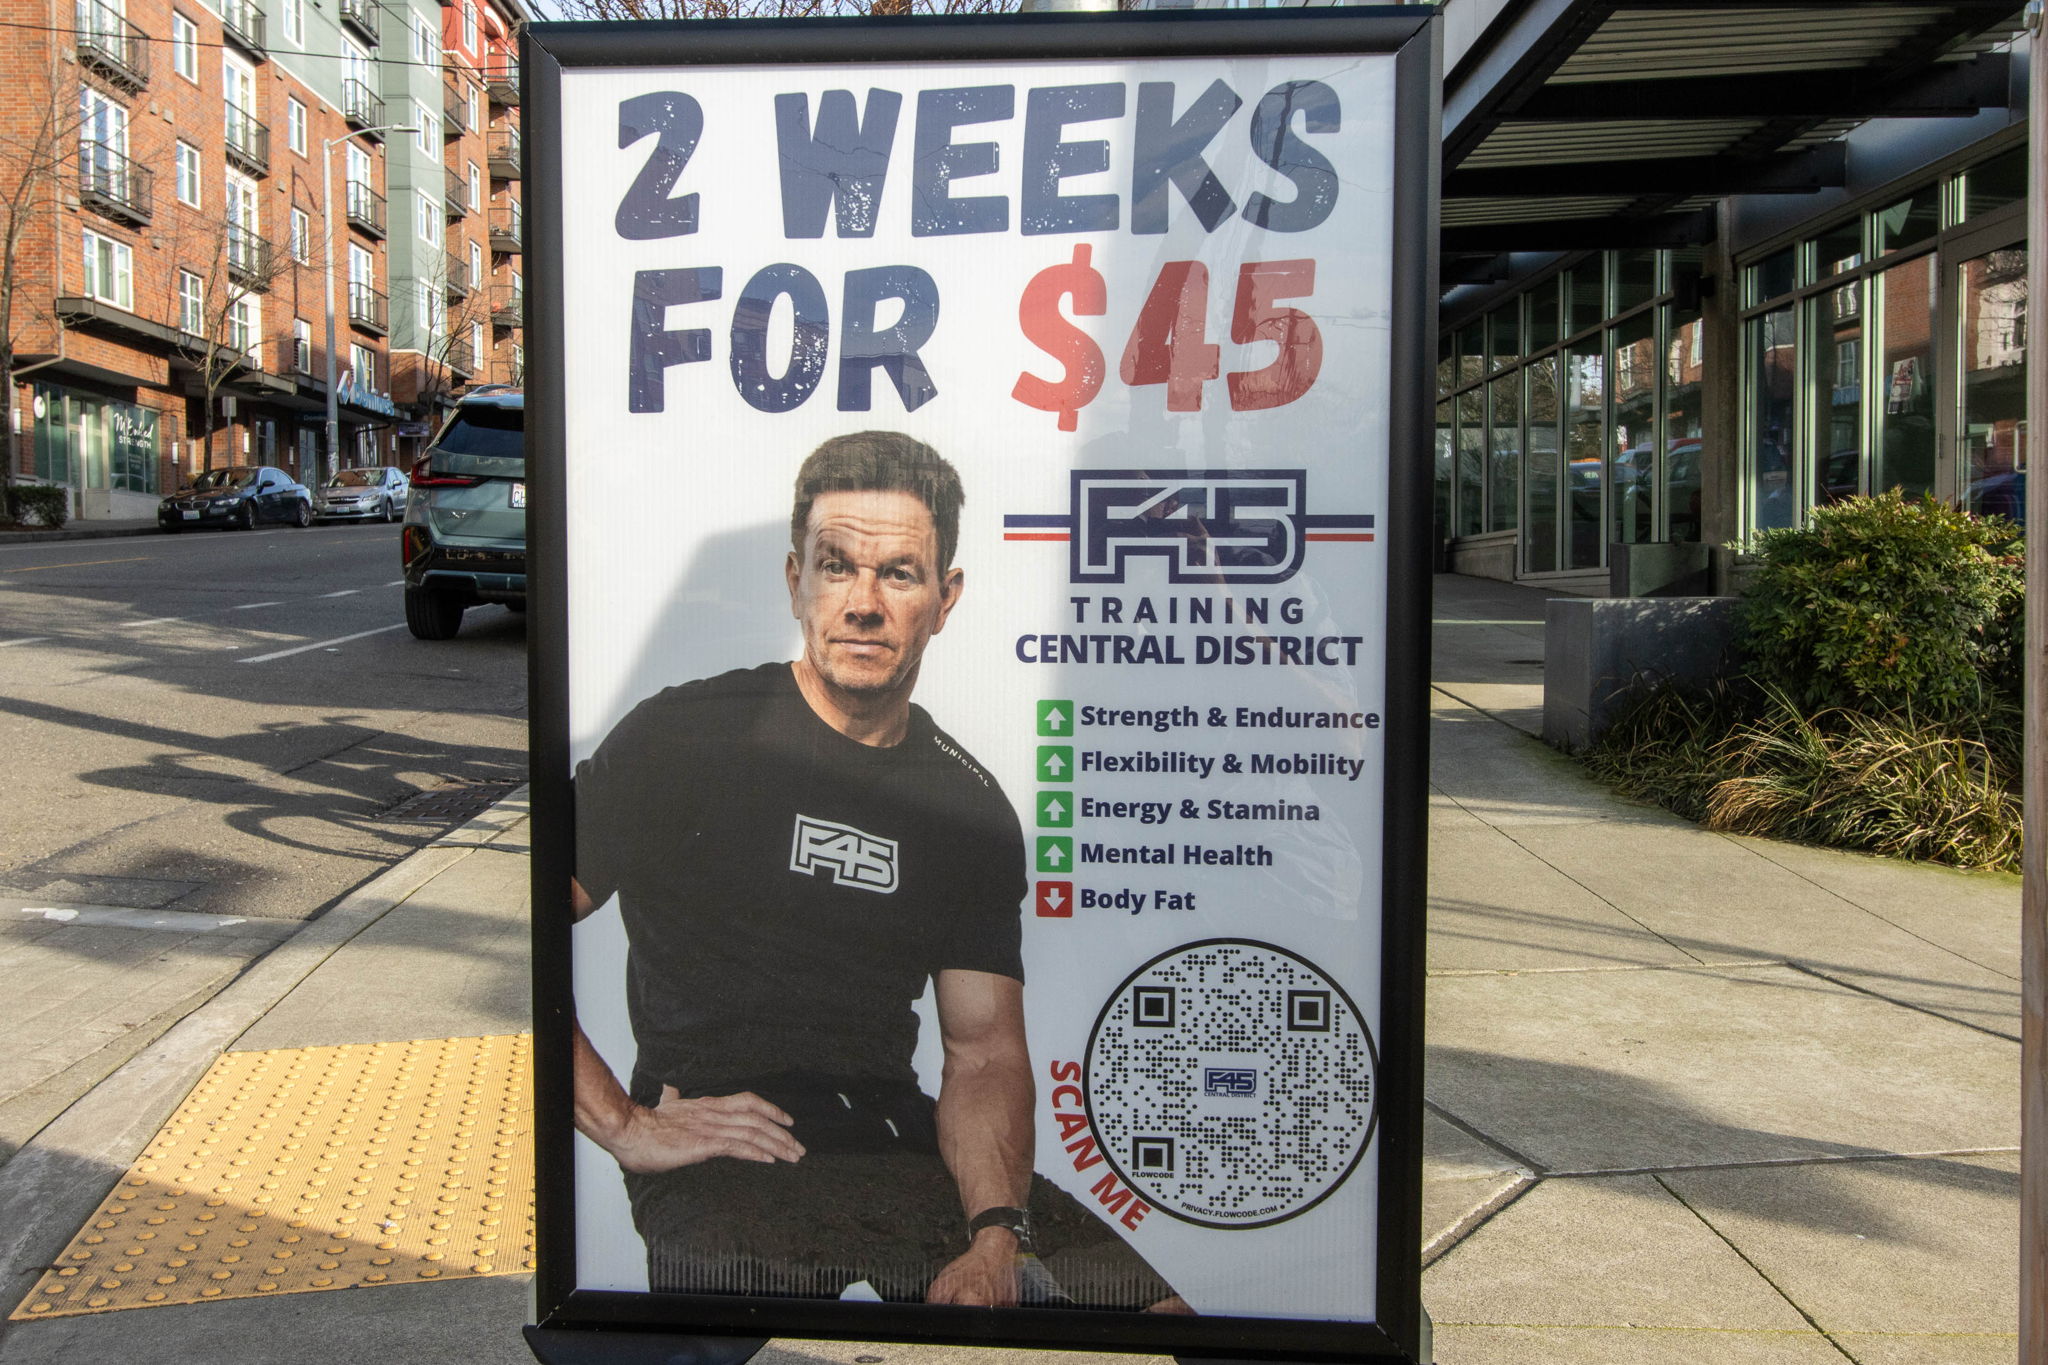 F45 TRAINING - CENTRAL DISTRICT